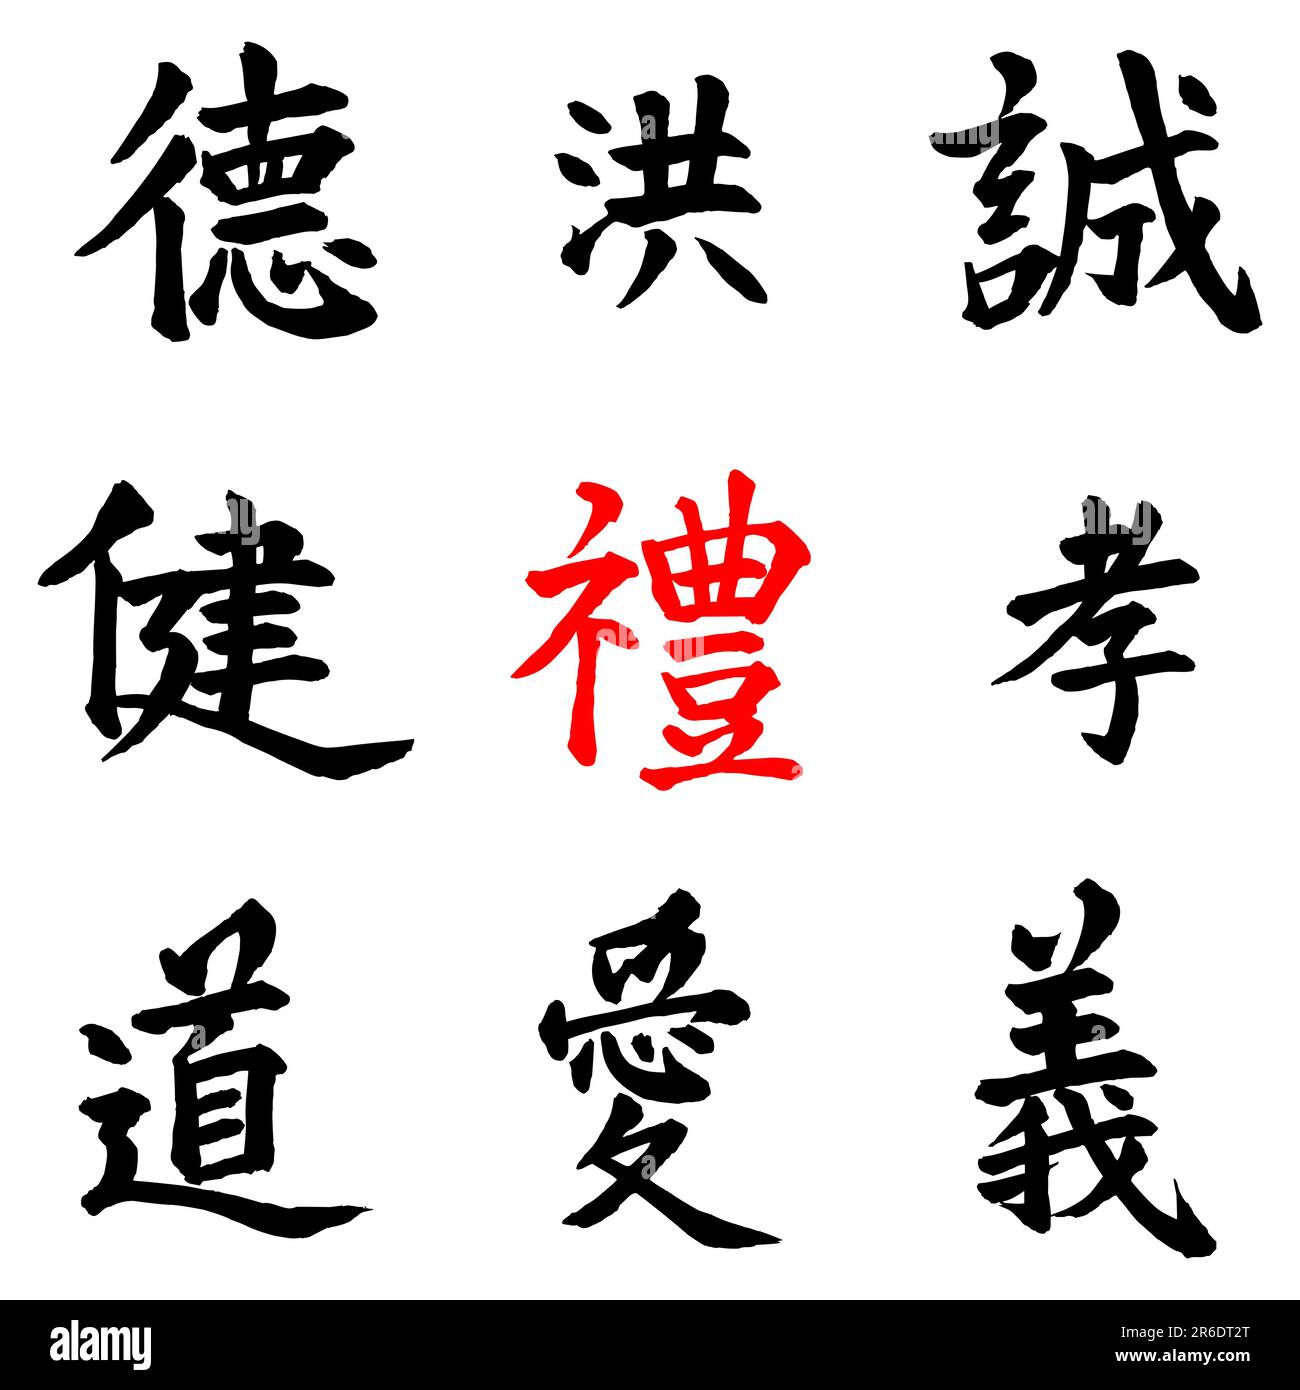 chinese-writing-vector-illustration-stock-vector-image-art-alamy